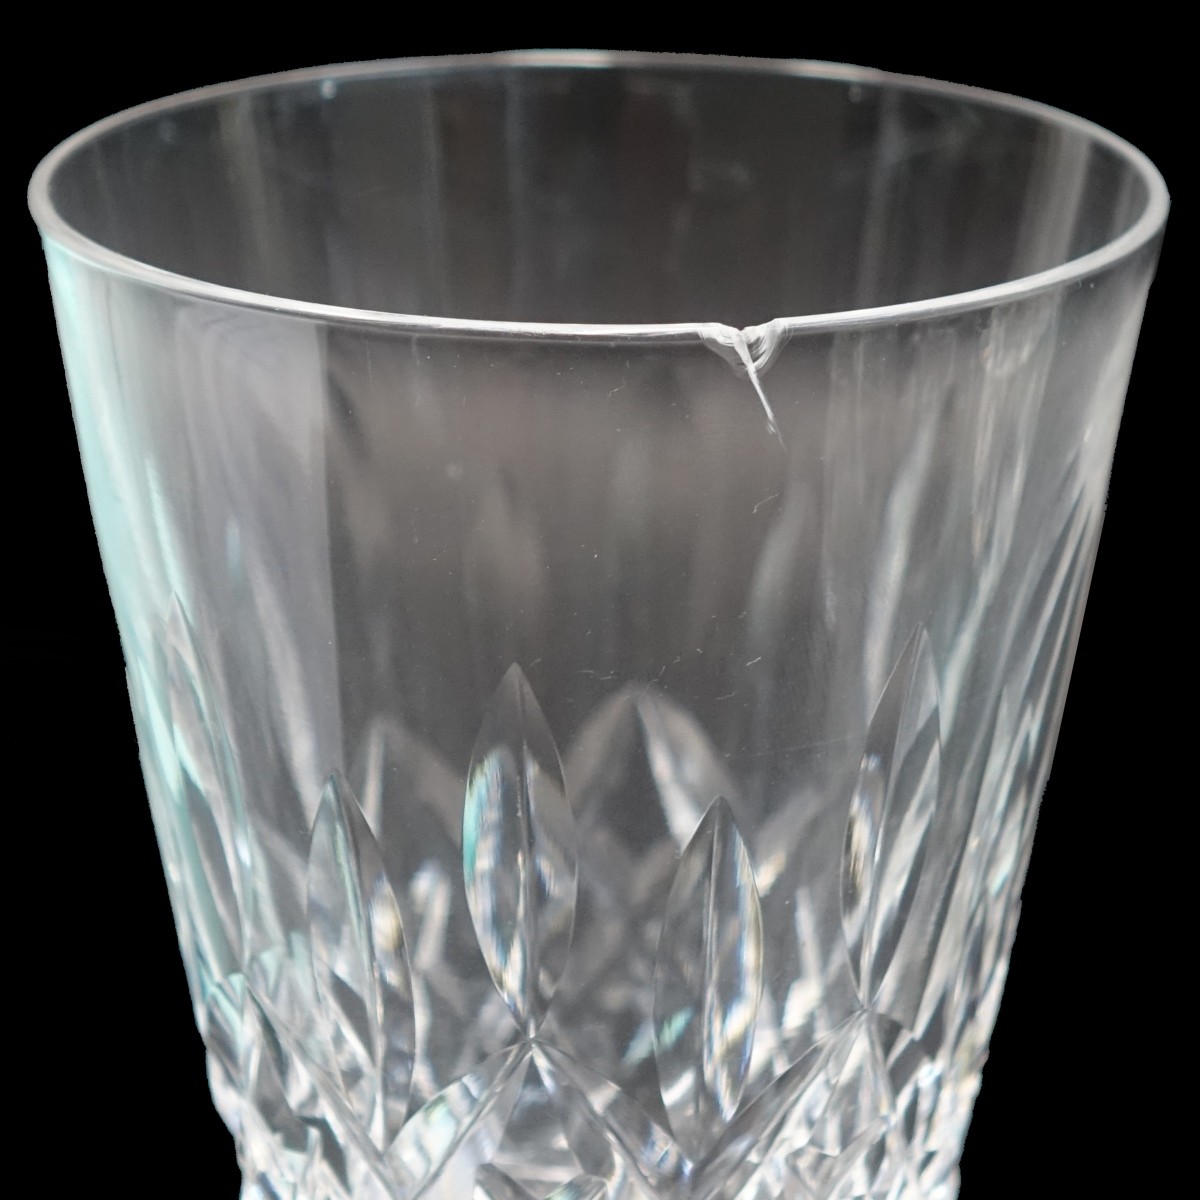 Waterford "Lismore" Glasses